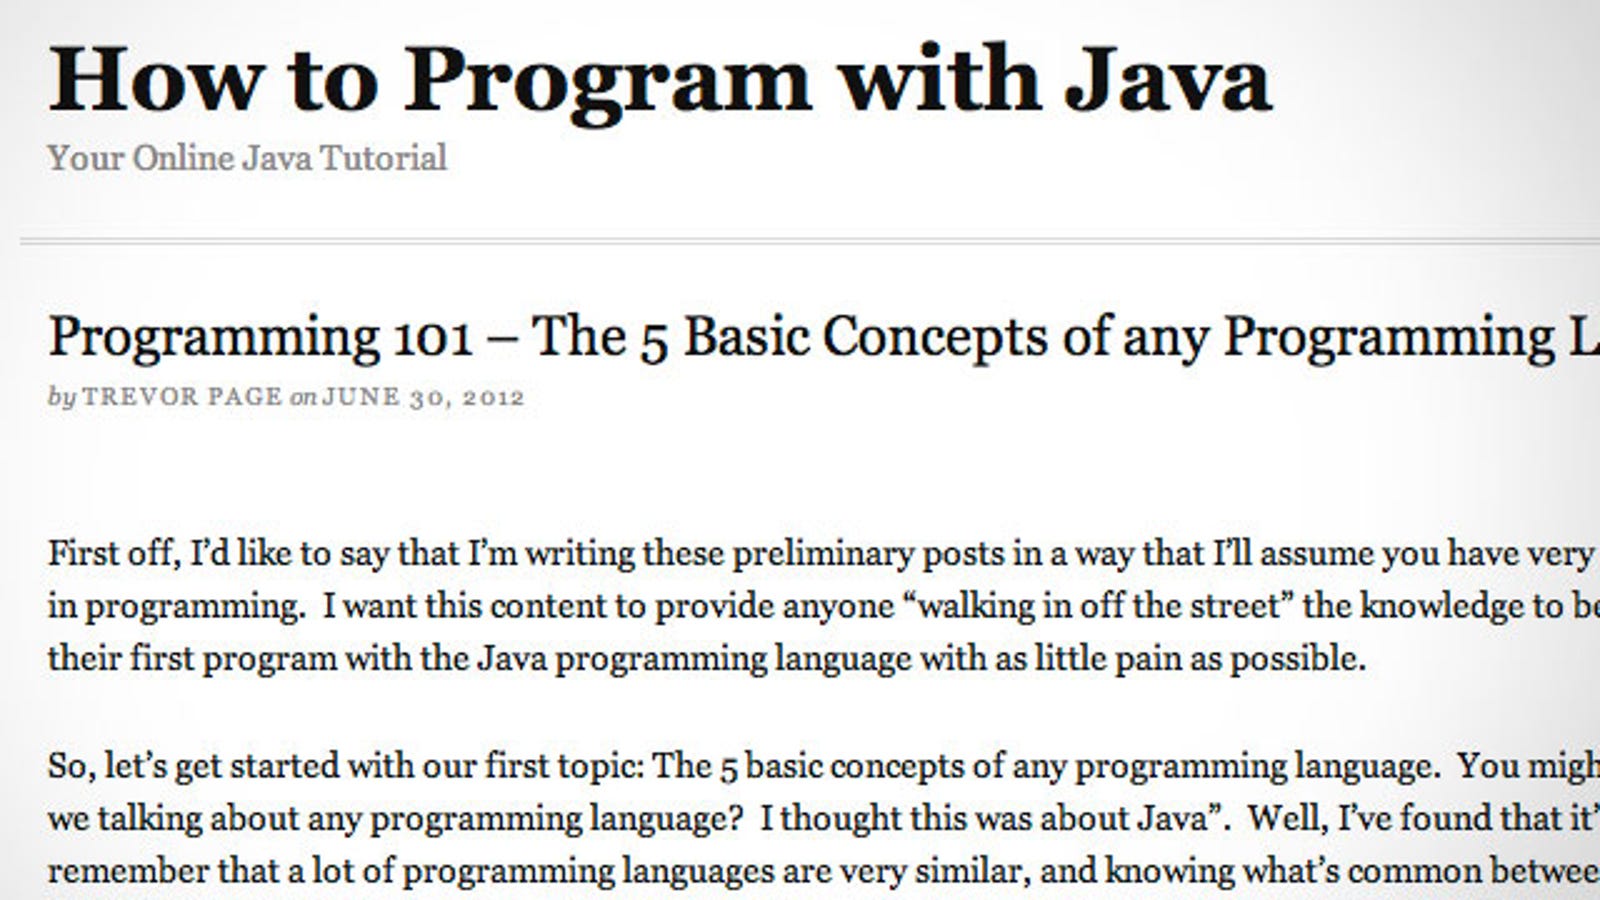 How To Program With Java Teaches You The Basic Concepts Of Programming 9061